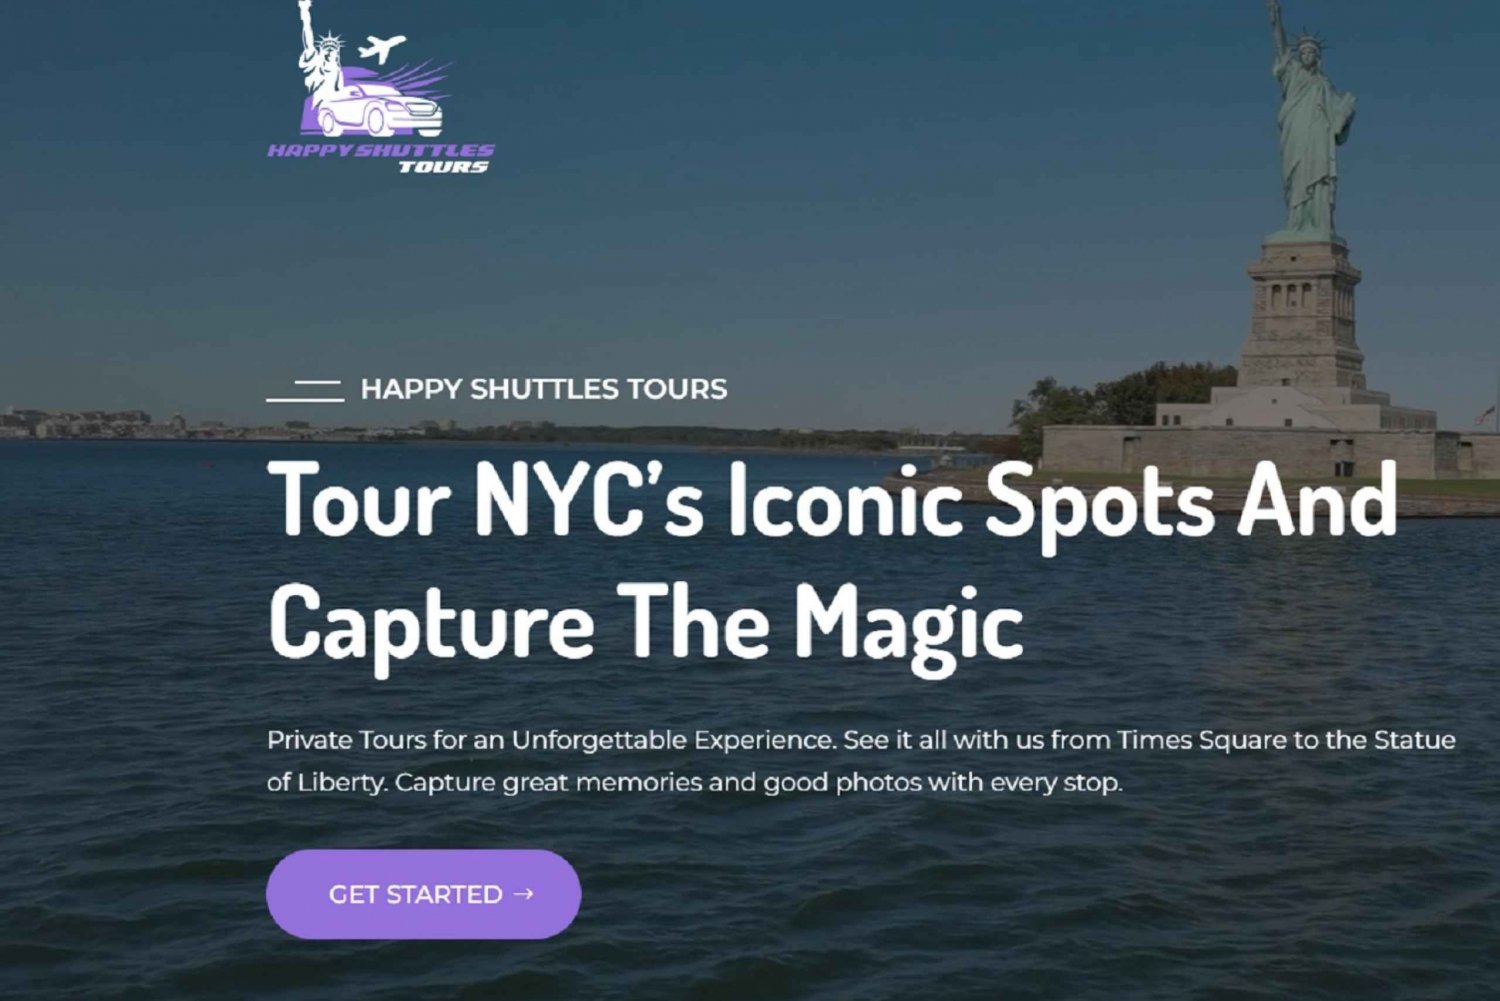 Tour NYC’s Iconic Spots And Capture The Magic